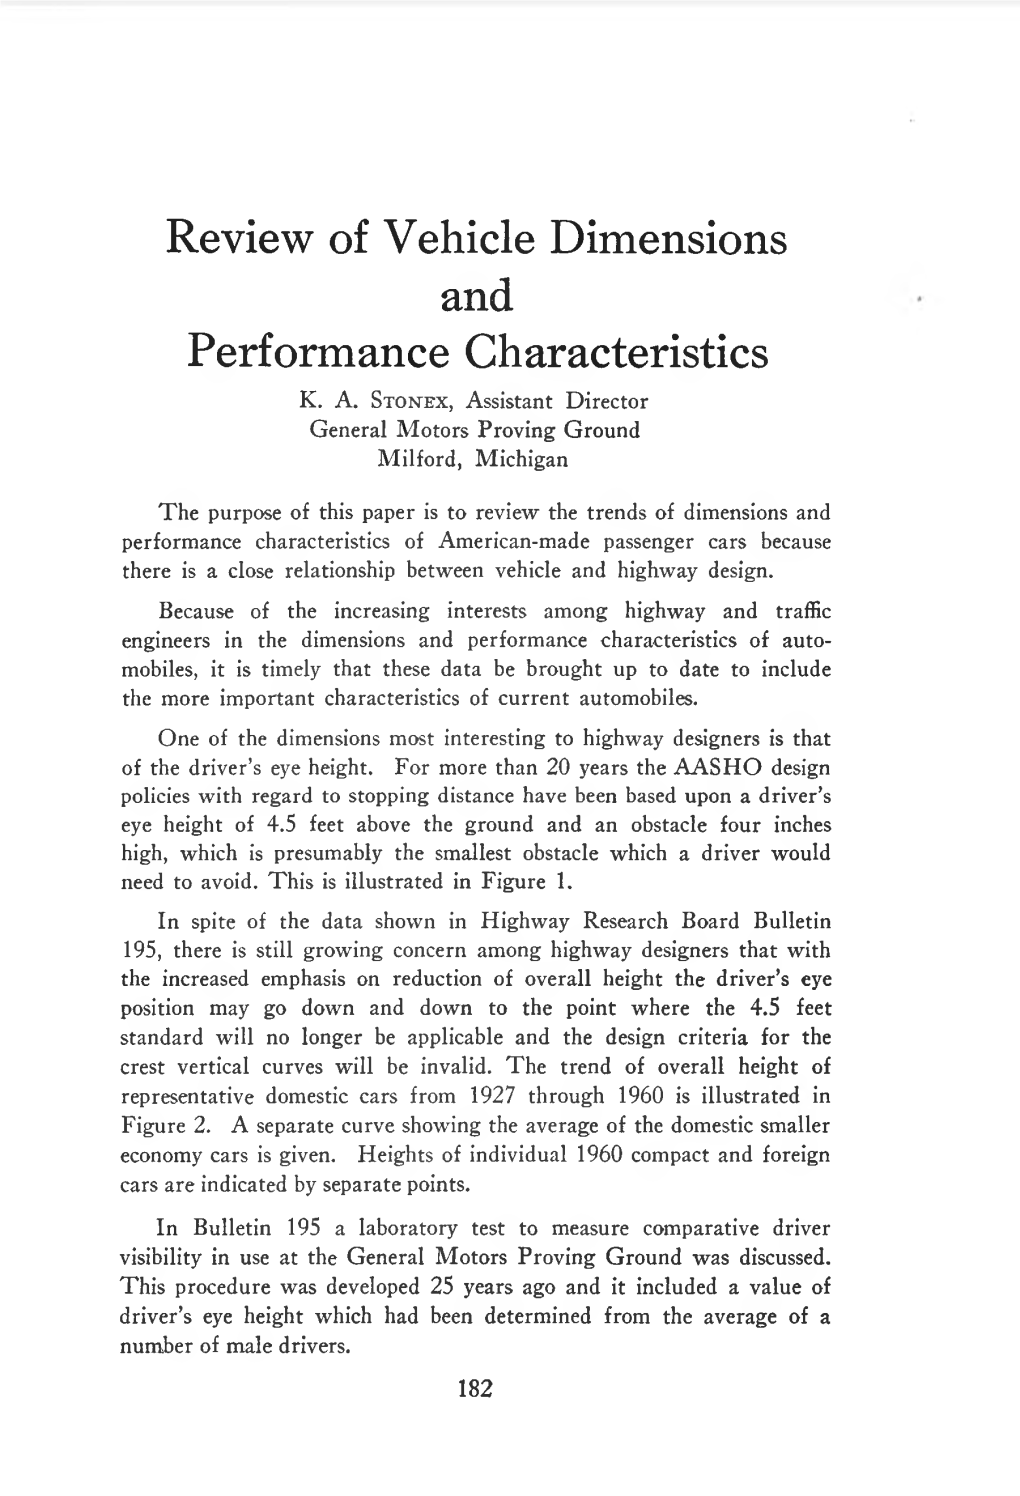 Review of Vehicle Dimensions and Performance Characteristics K